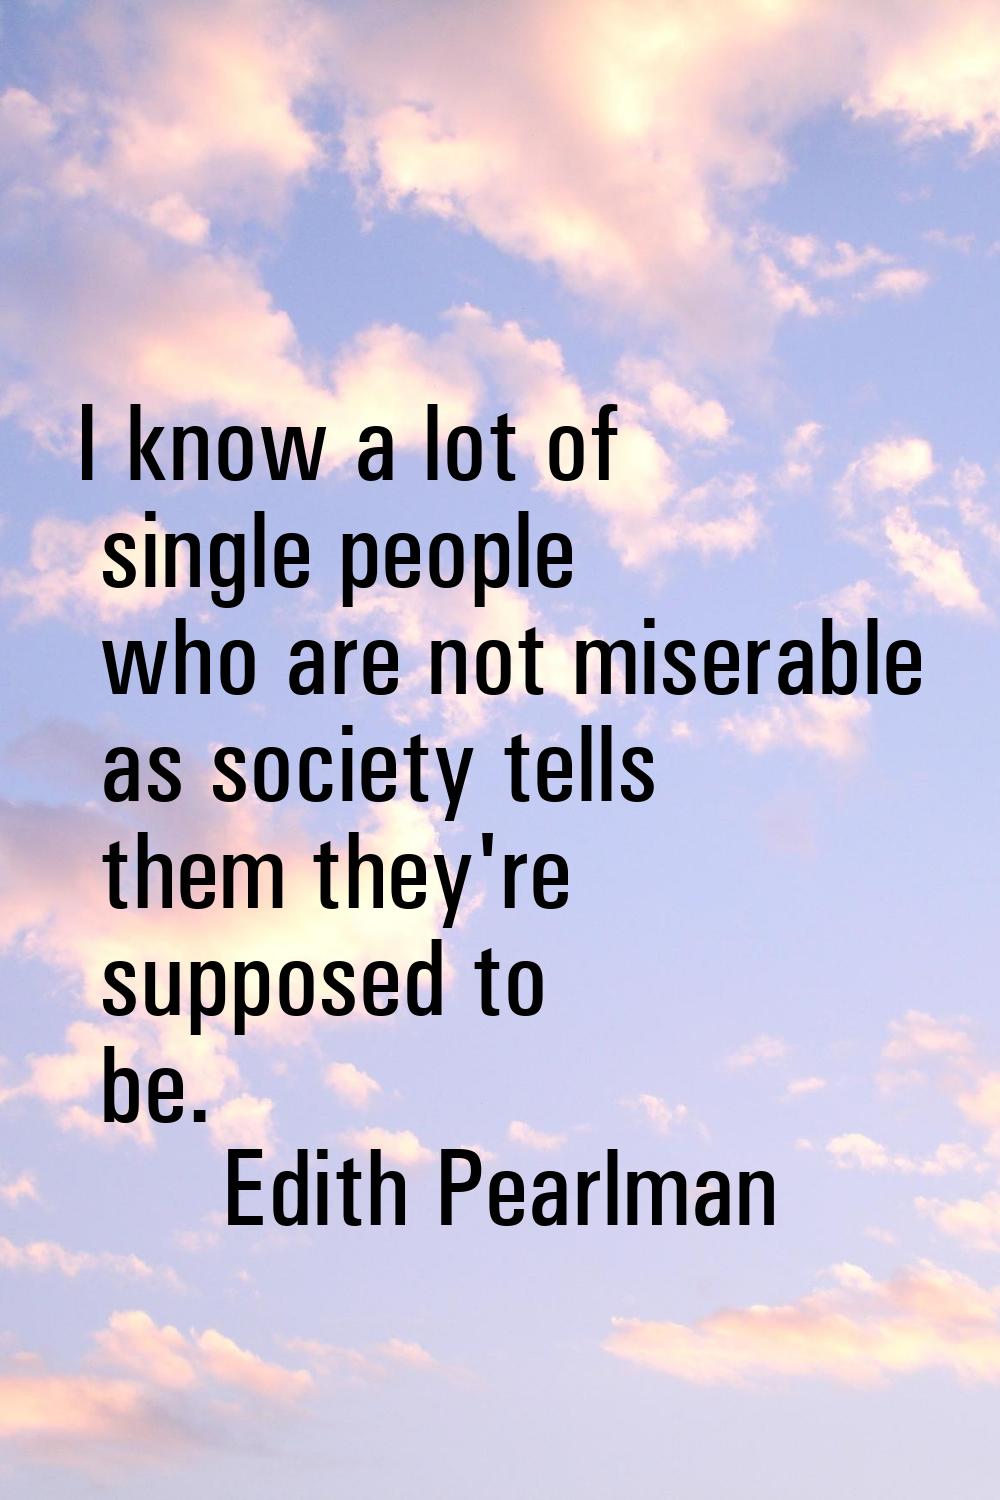 I know a lot of single people who are not miserable as society tells them they're supposed to be.